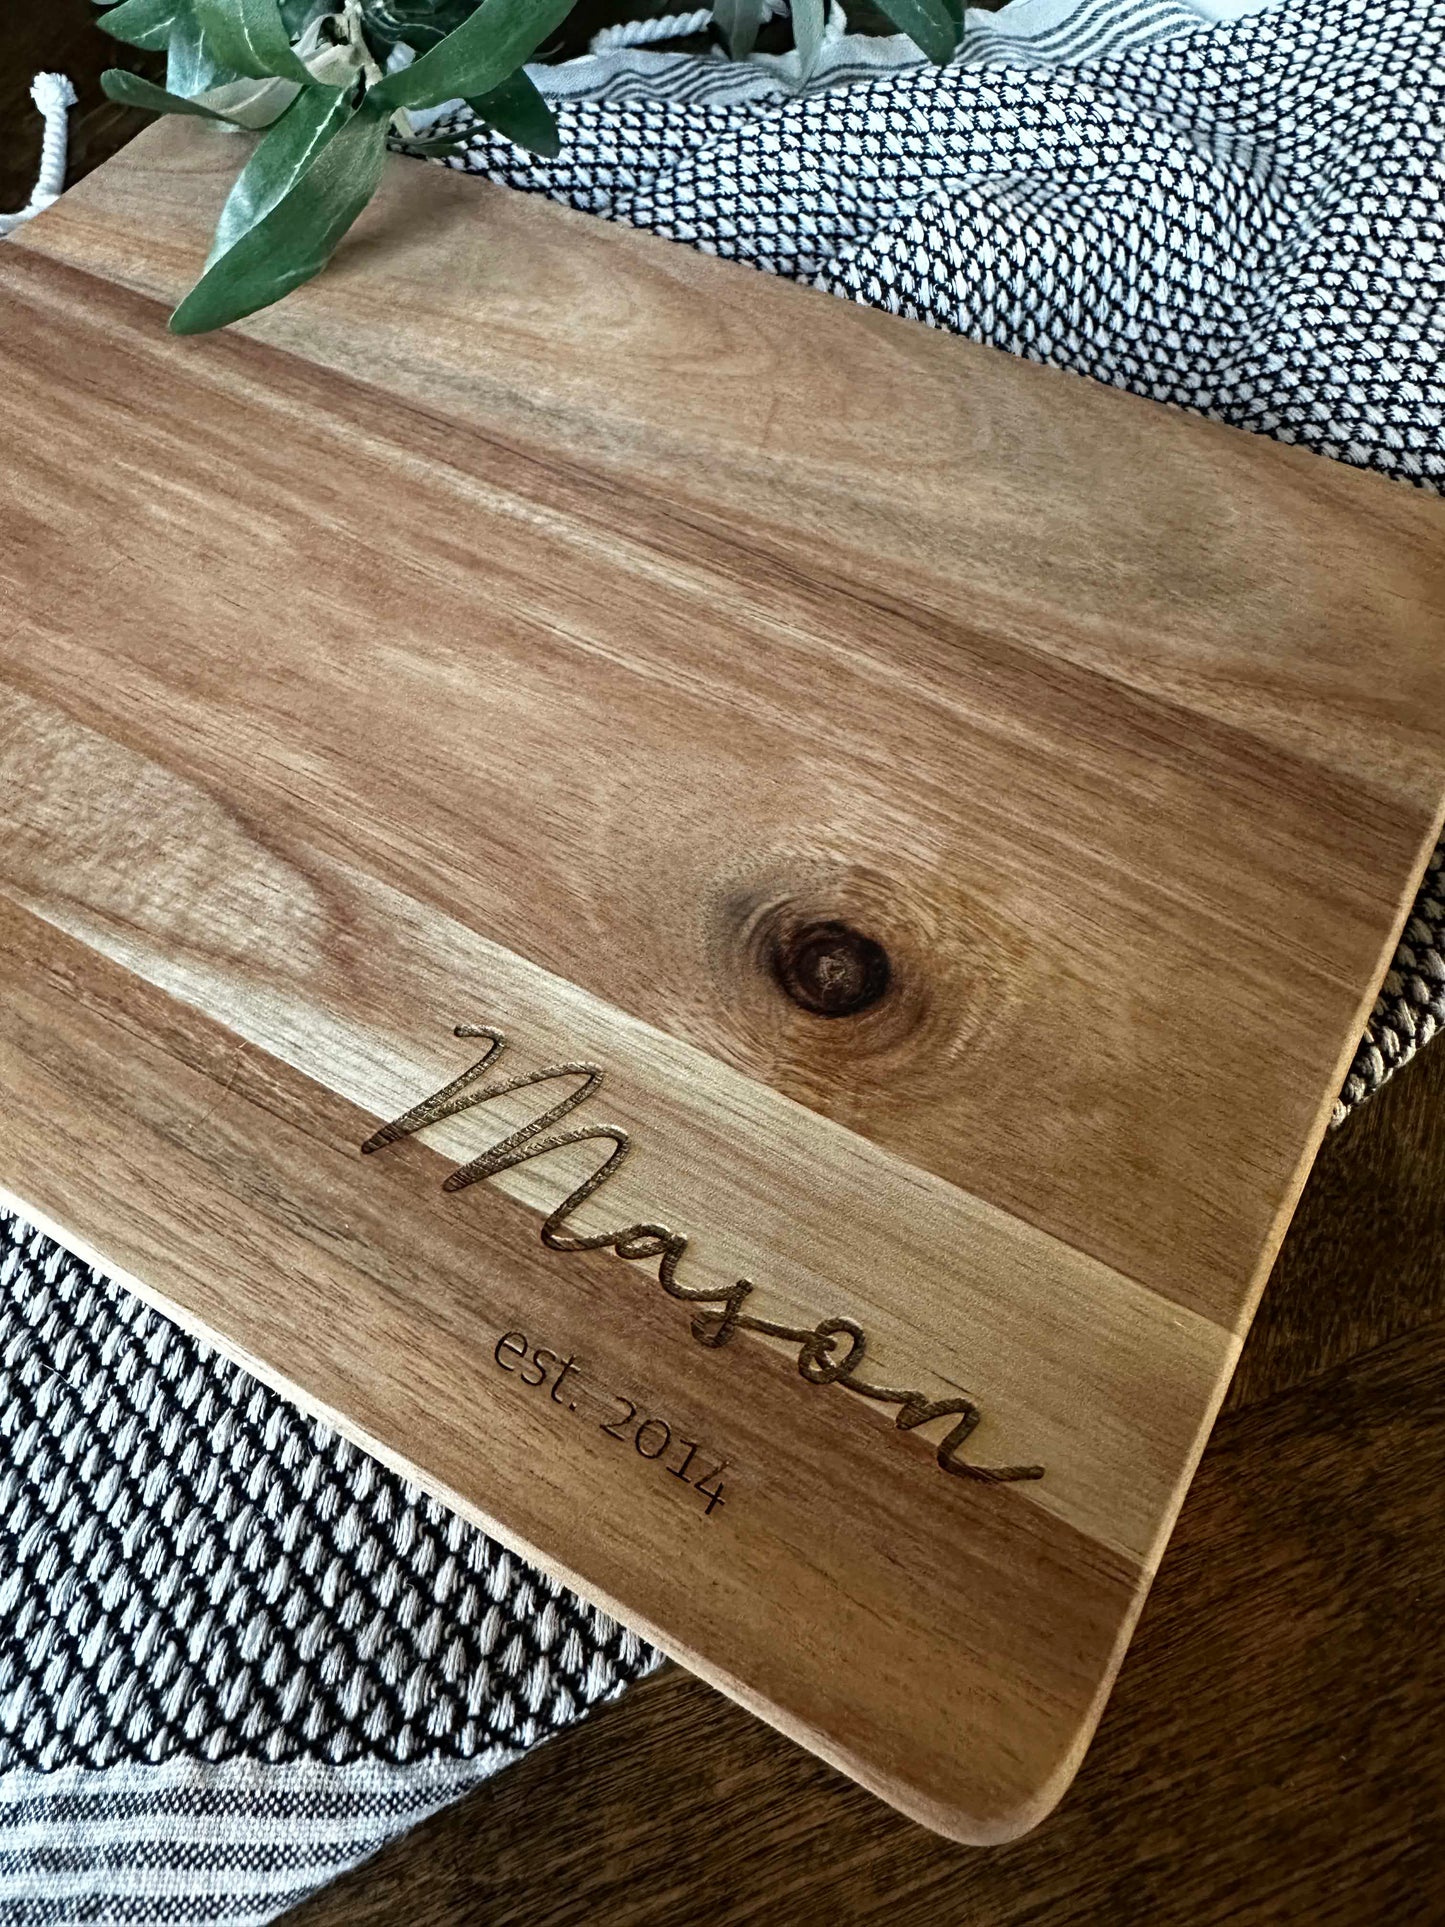 Cutting board personalized with handle